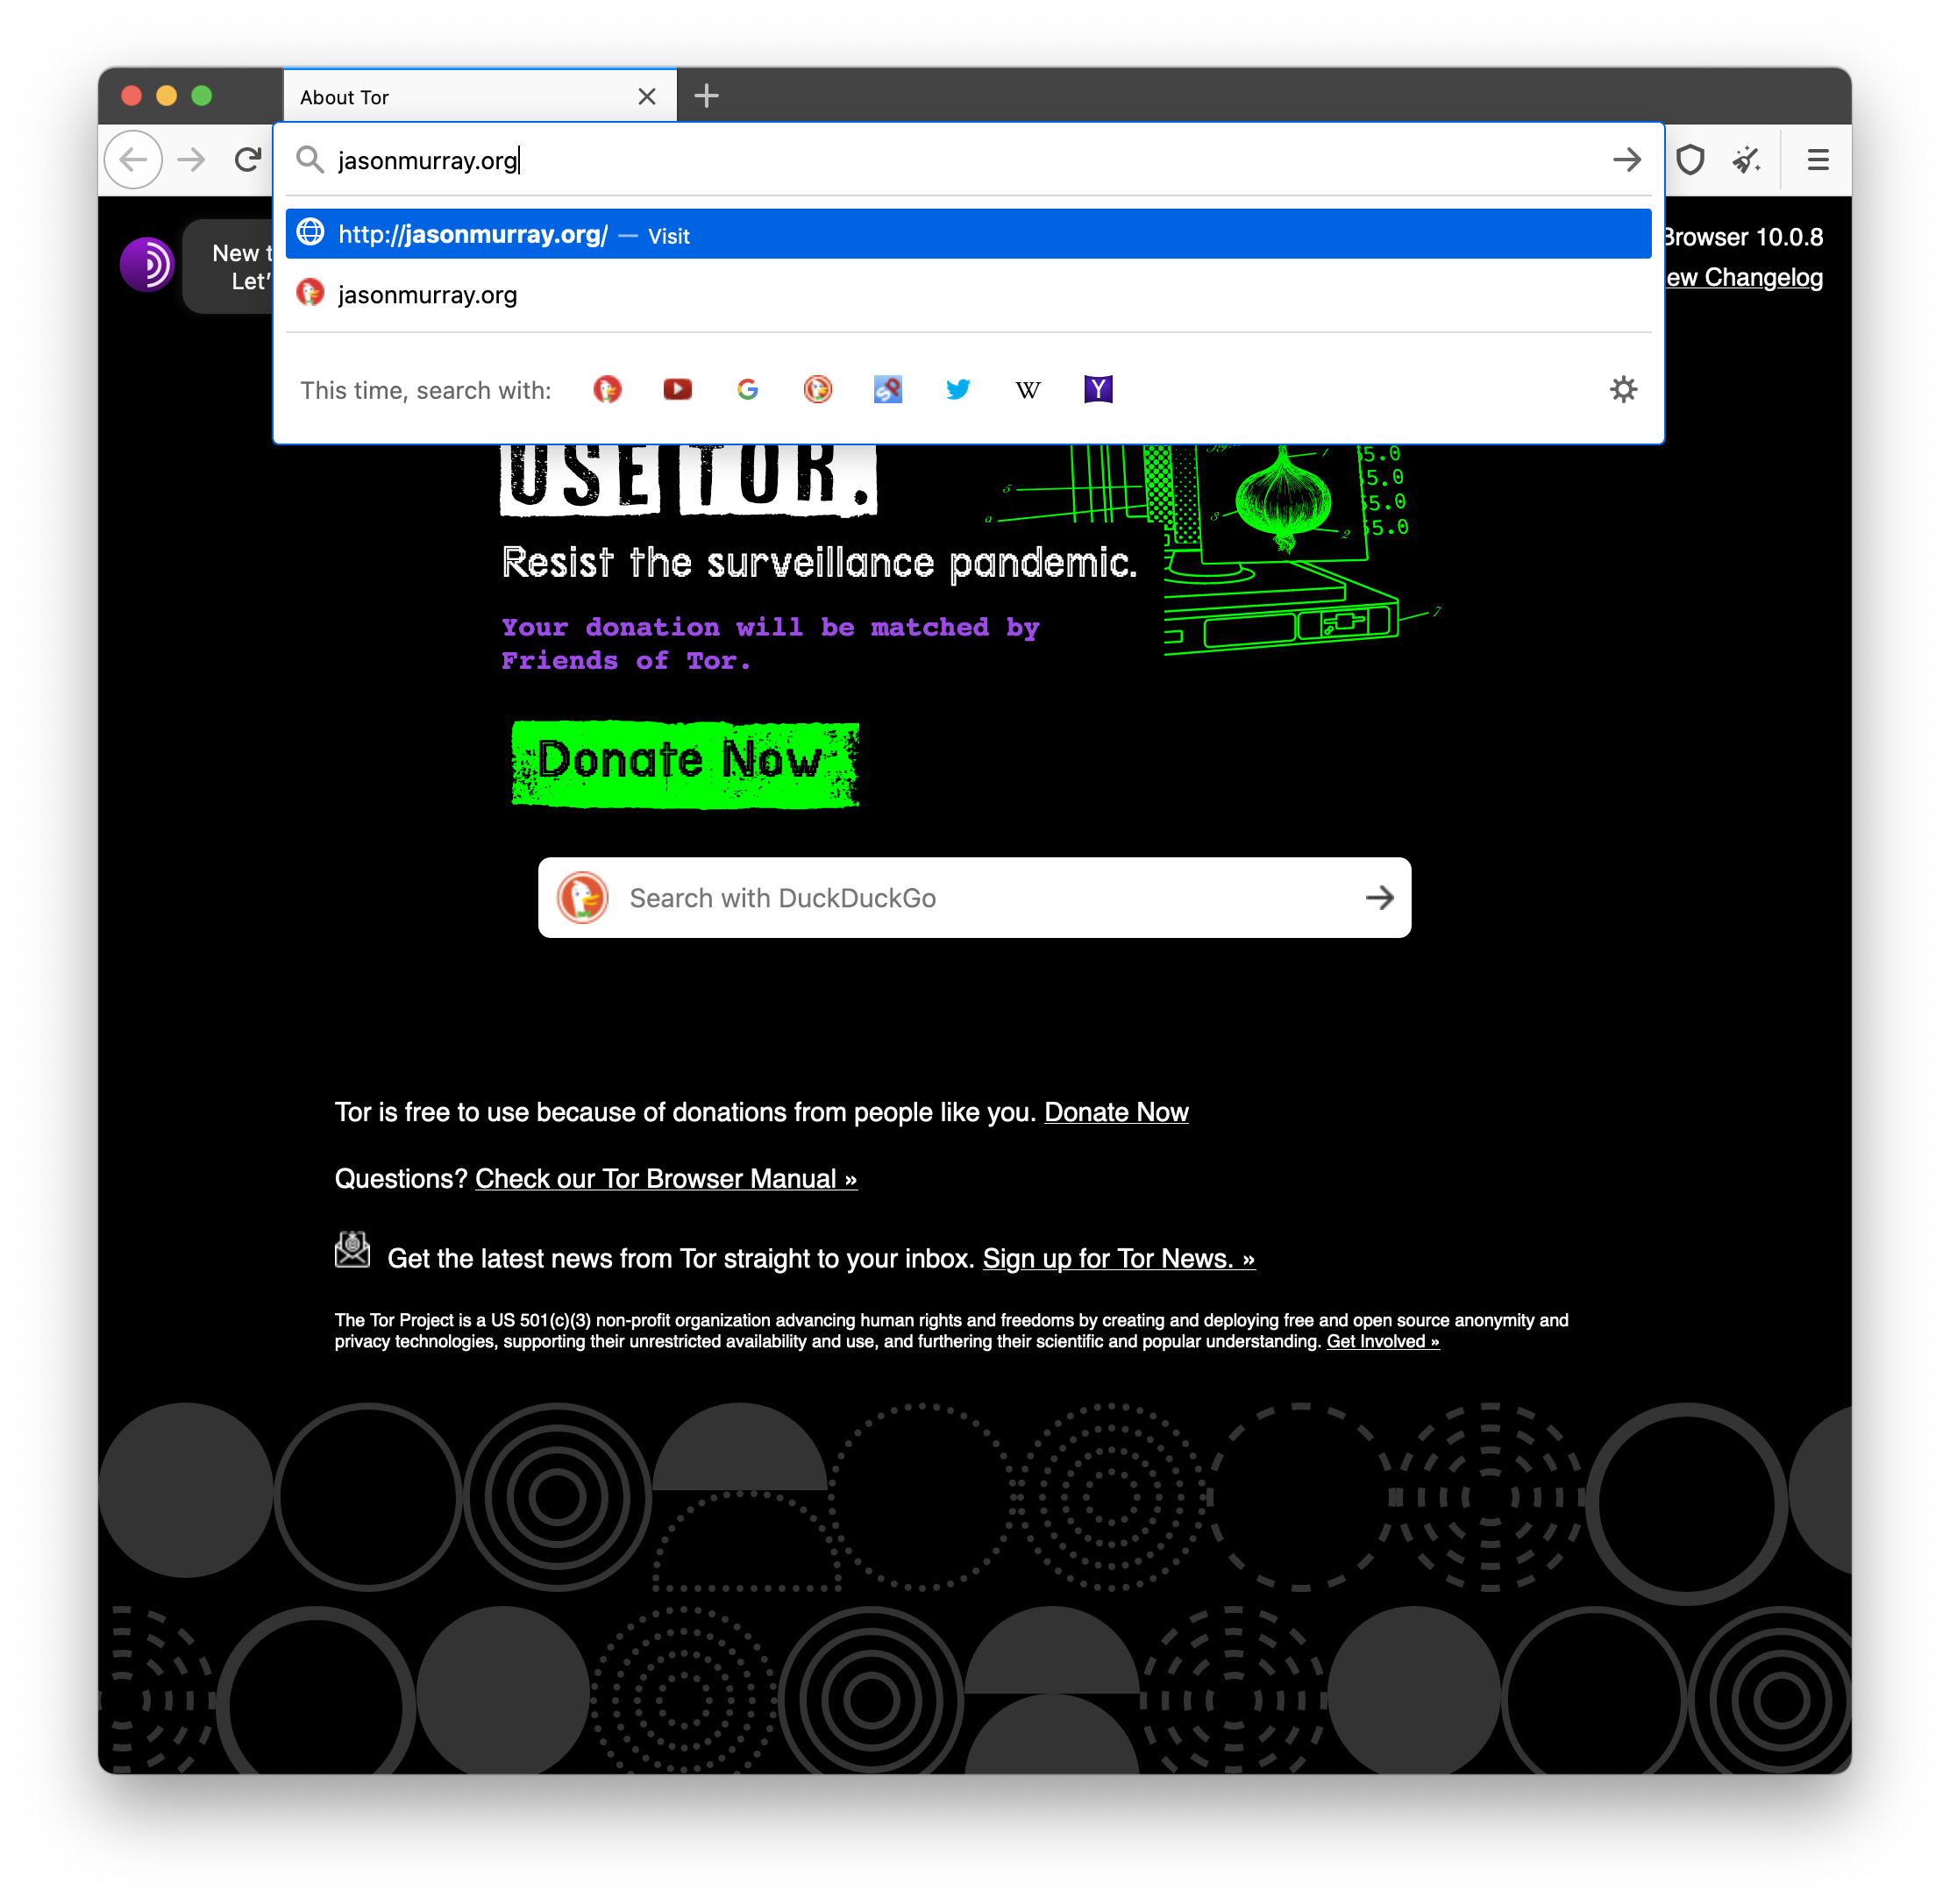 Image of a graphical web browser with the URL https://jasonmurray.org